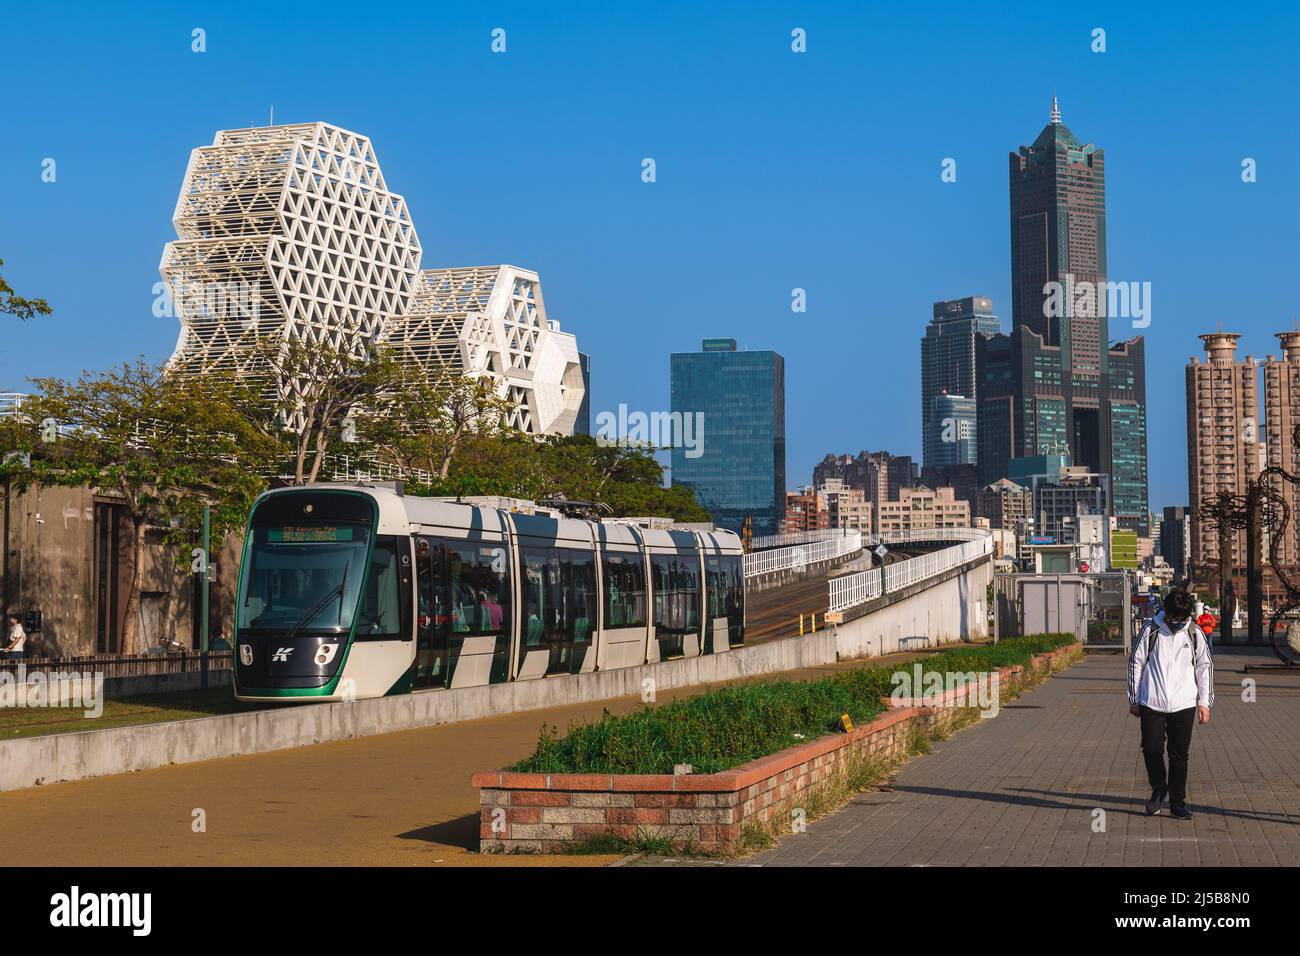 March 9, 2022: Dayi Pier 2 Station of Kaohsiung circular light rail system at Kaohsiung, taiwan. The greenery around the stations and rail areas allow Stock Photo